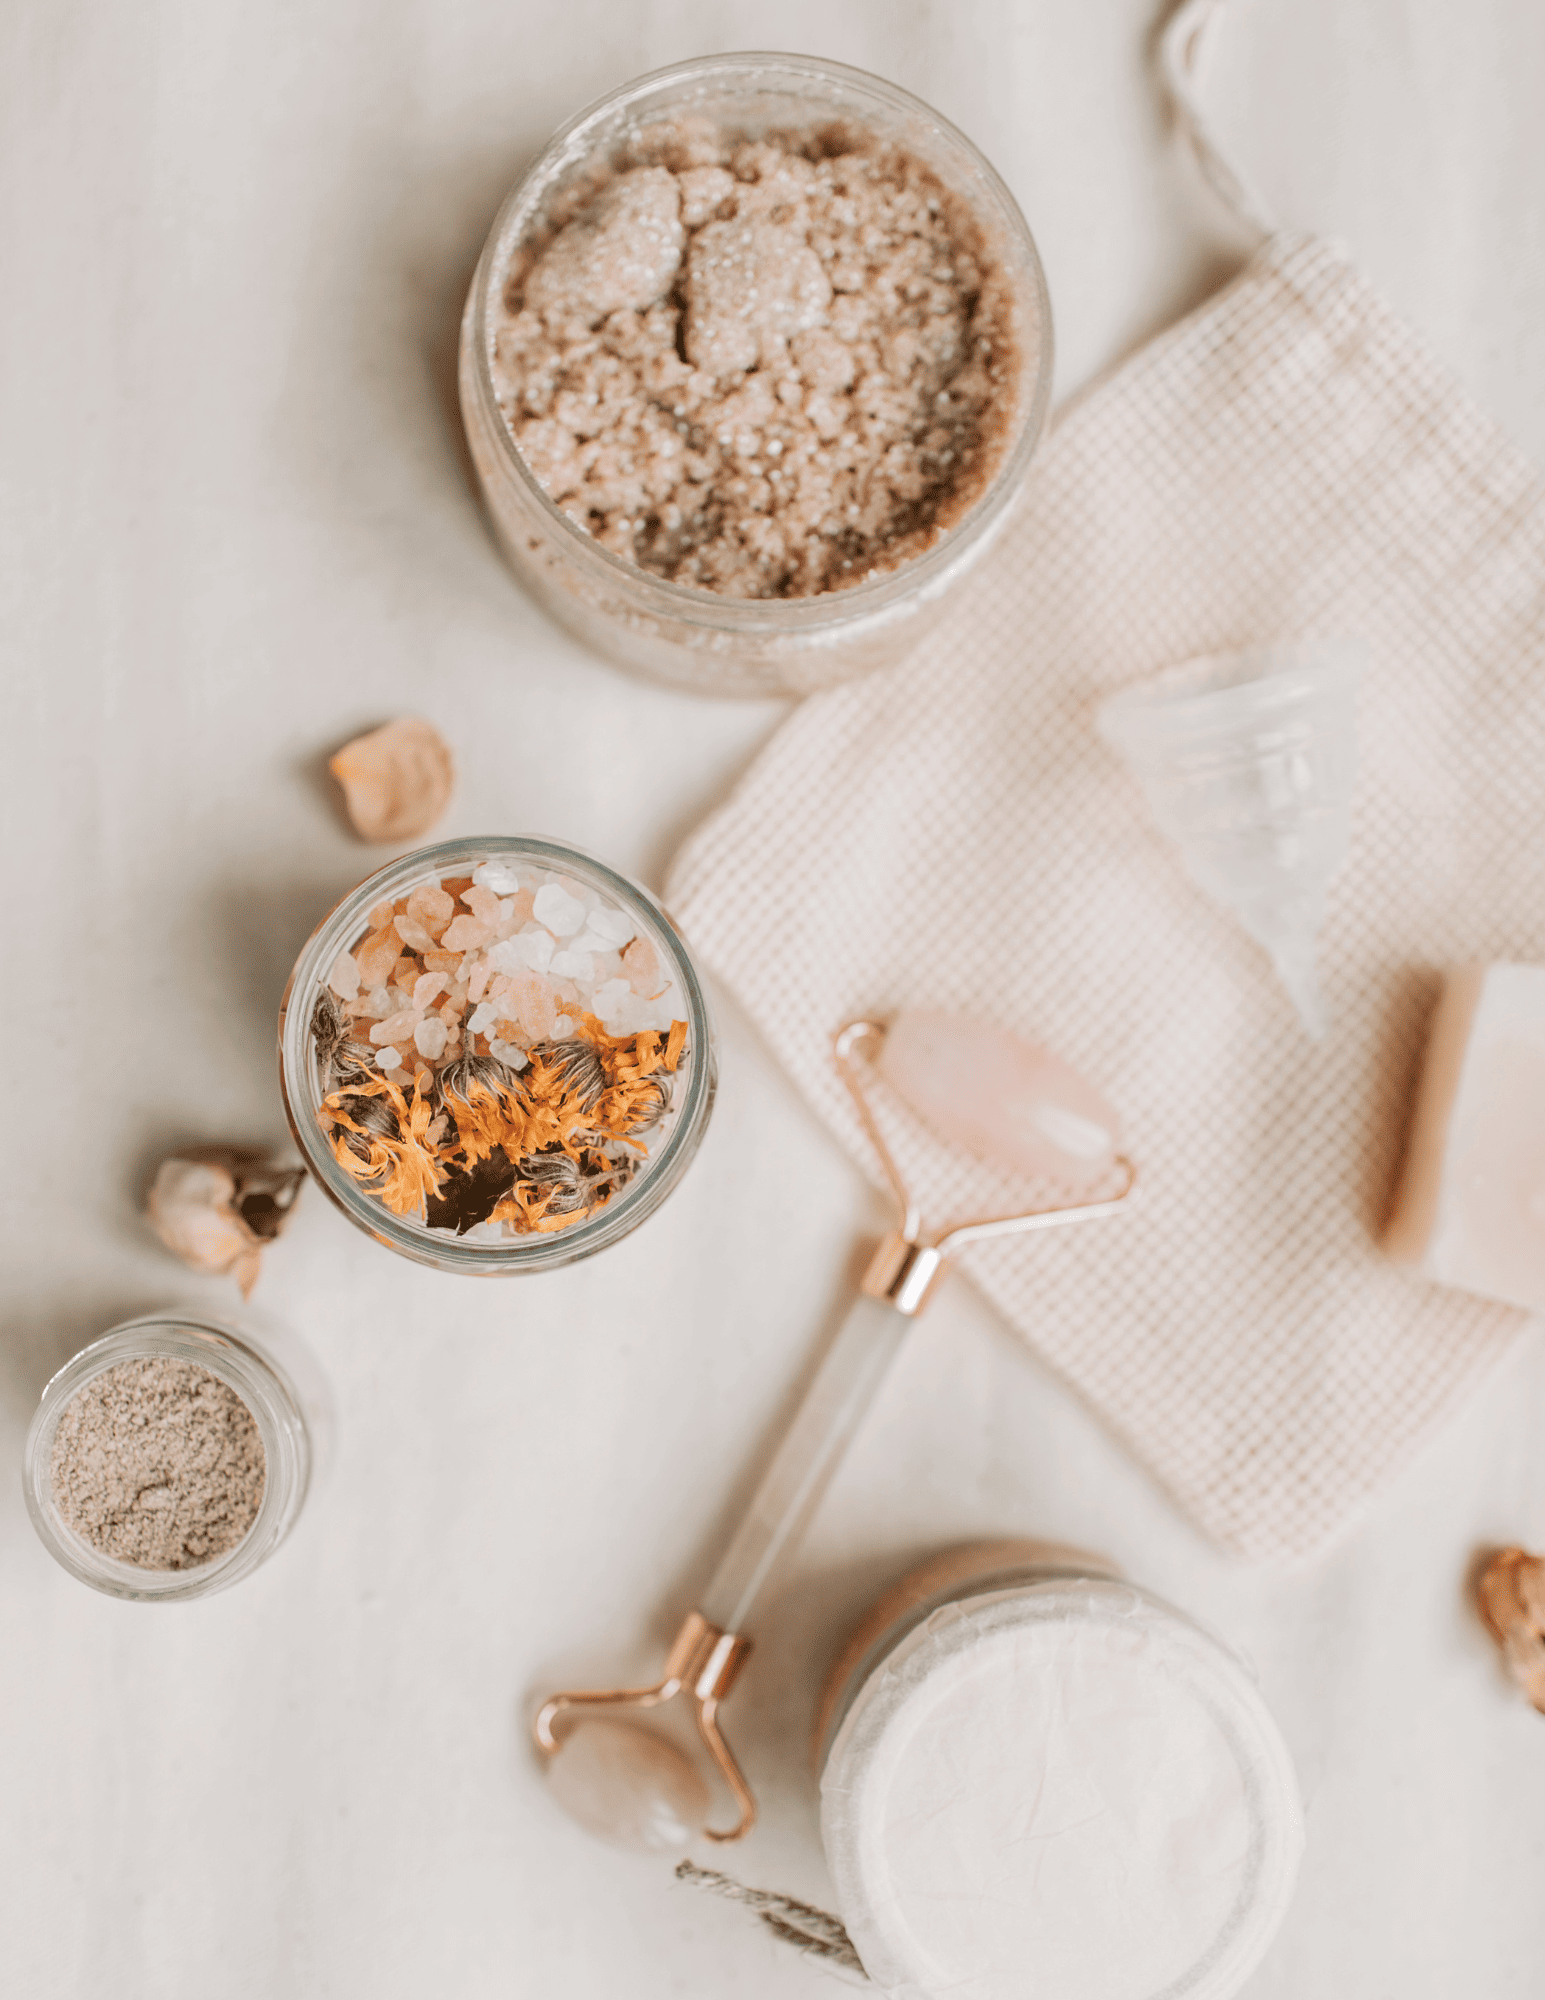 beauty products l for the a Winter self-care routines and practices blog post